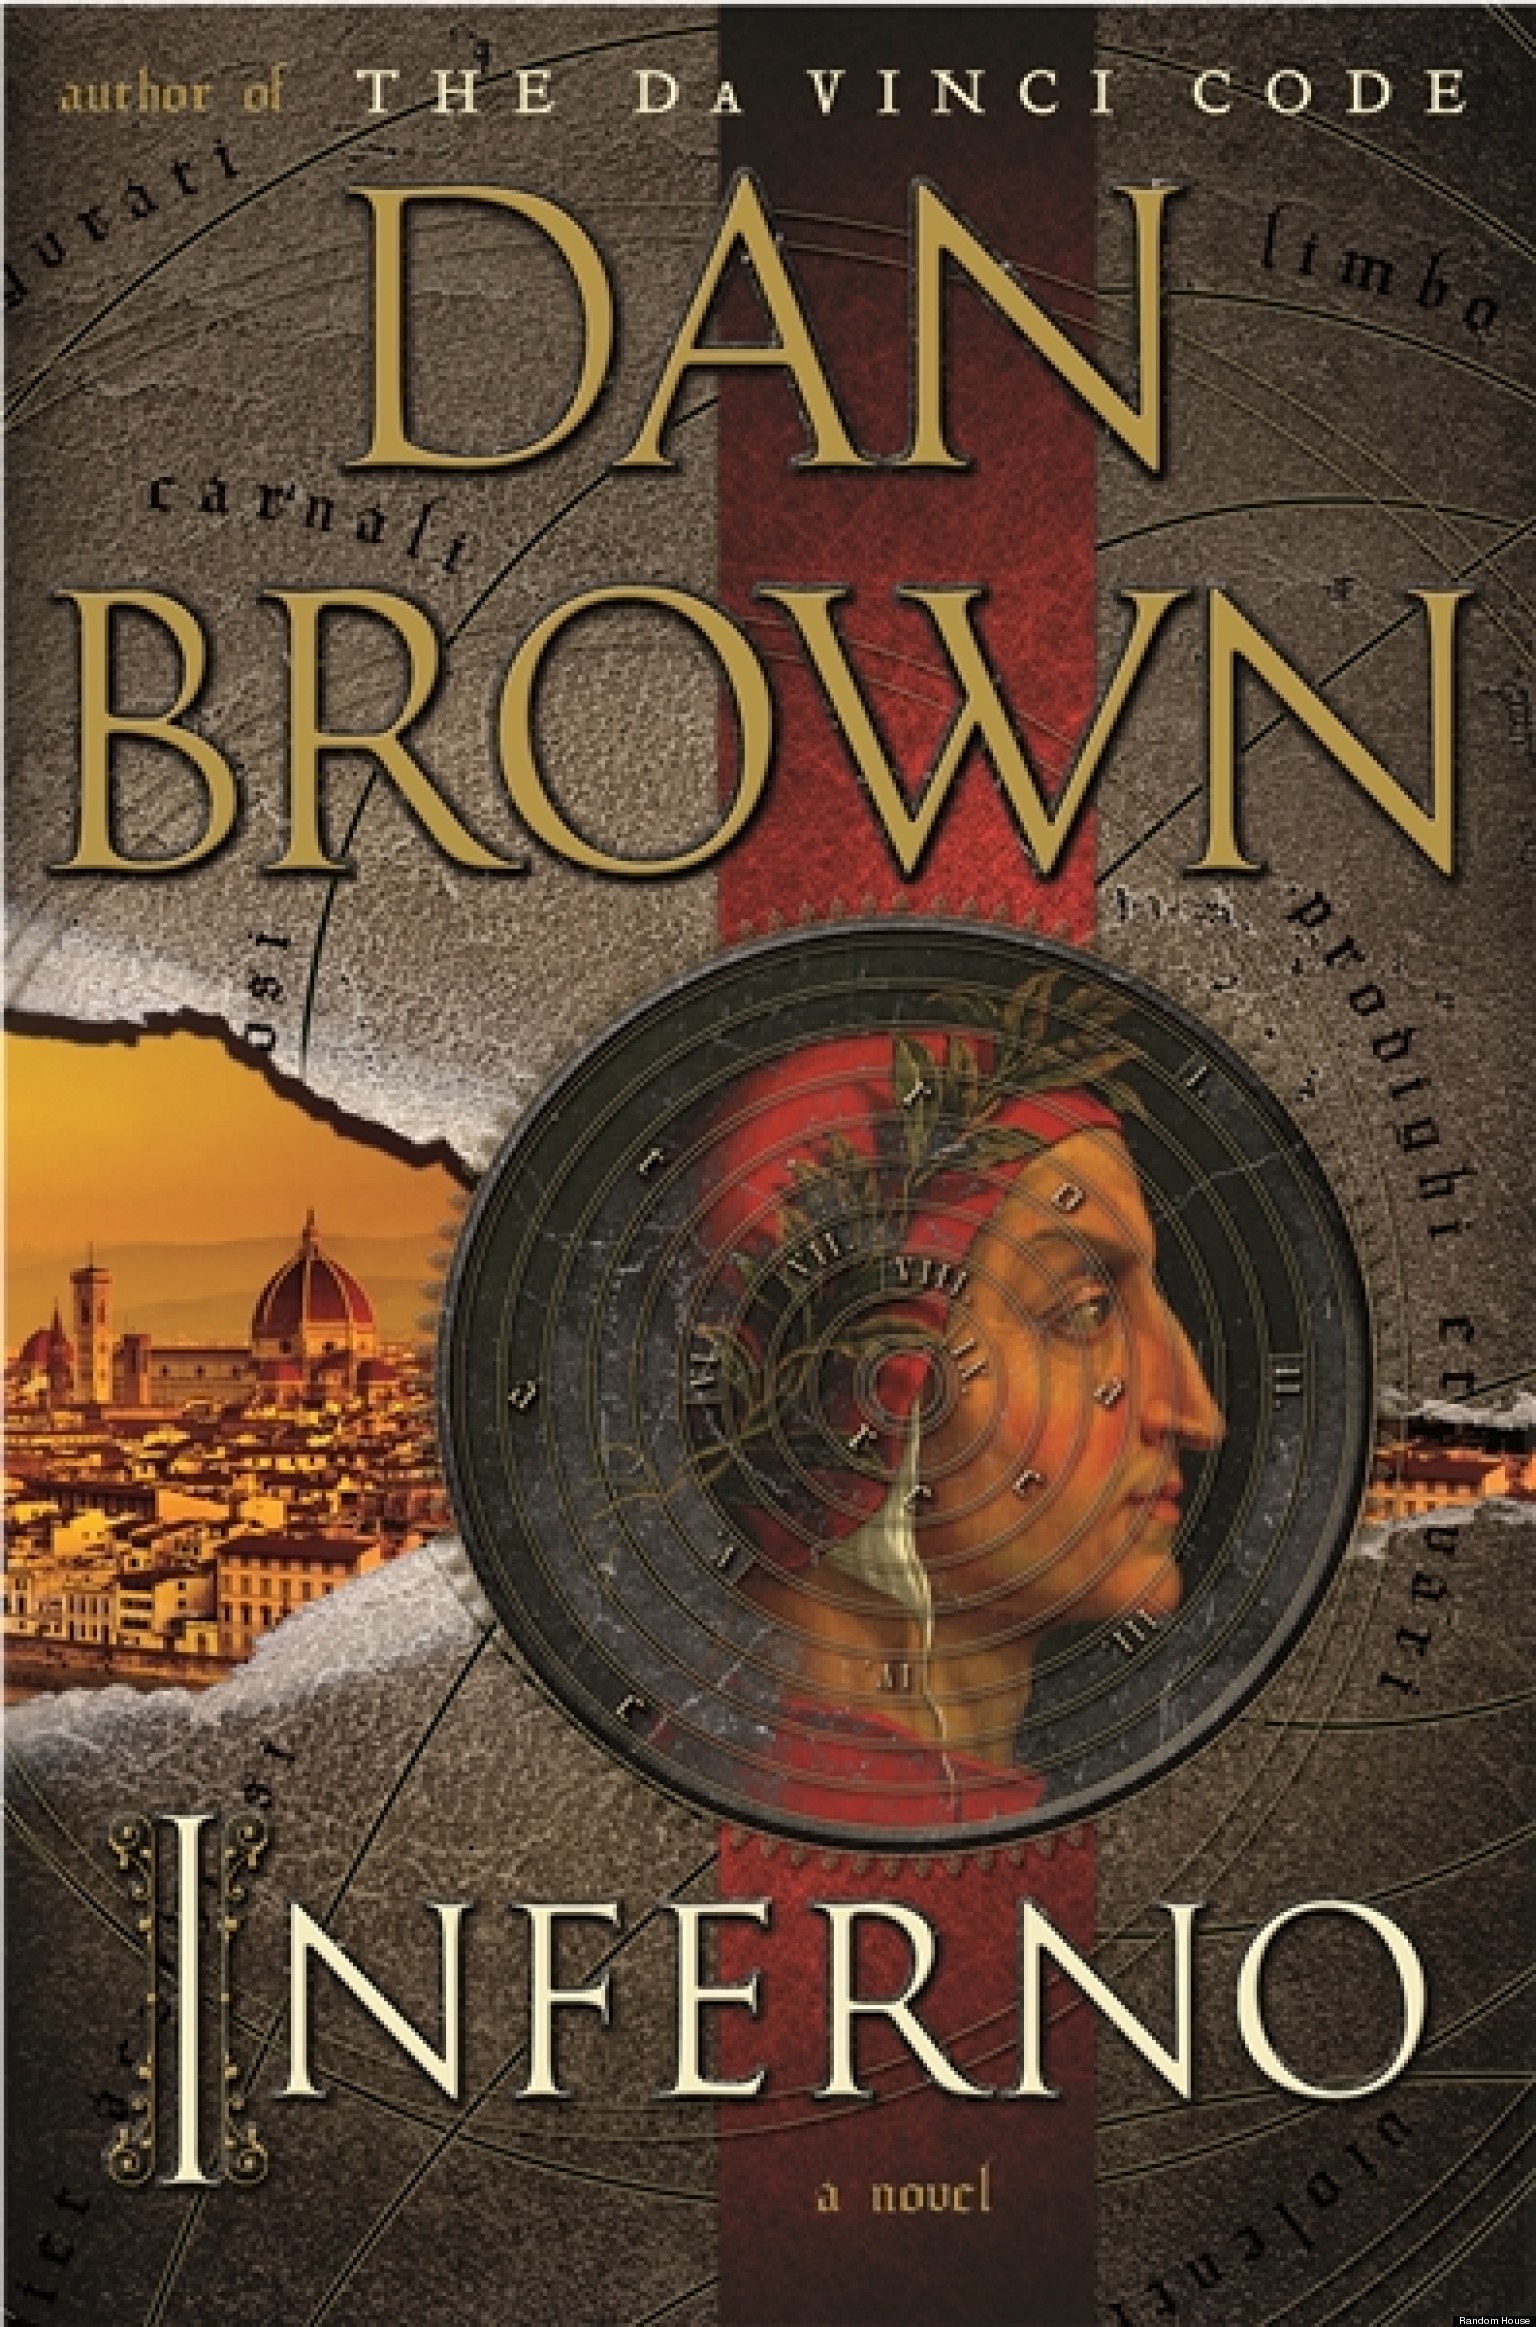 New Dan Brown Book, Inferno, Cover Revealed (PHOTO) | HuffPost